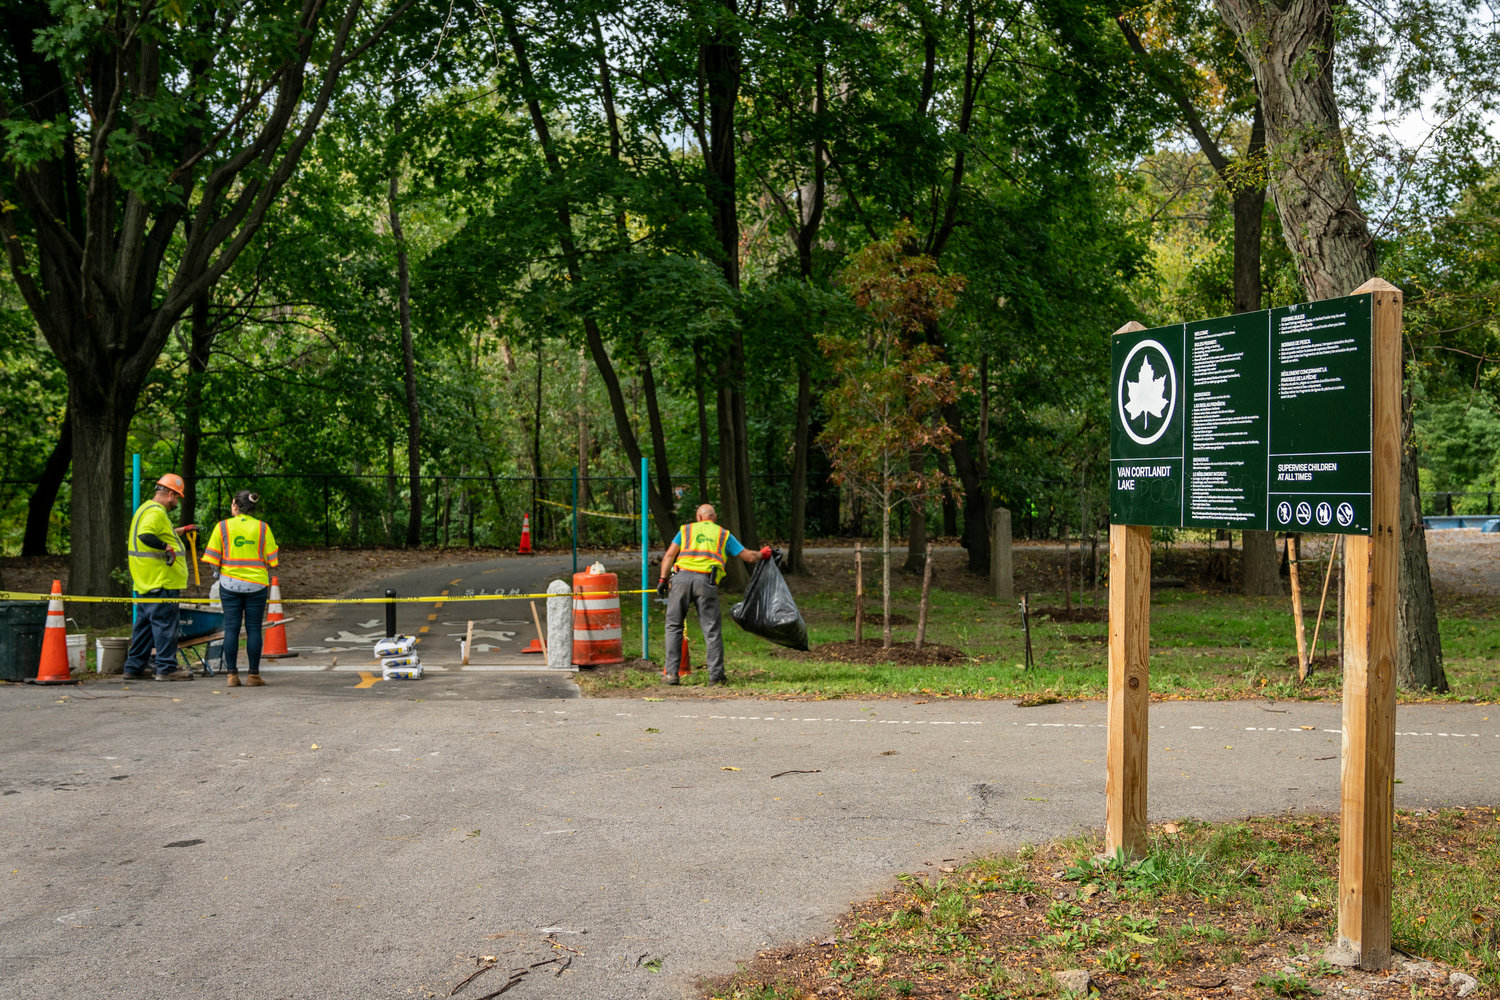 Compacted soil, removal of native and invasive plant species alike, and heat radiating from the asphalt are all concerns of Debbi Dolan — a self-proclaimed longtime lover of Van Cortlandt Park — and some of her peers before the Putnam Trail was paved. Many of those concerns are stronger now that the trail has been reopened.